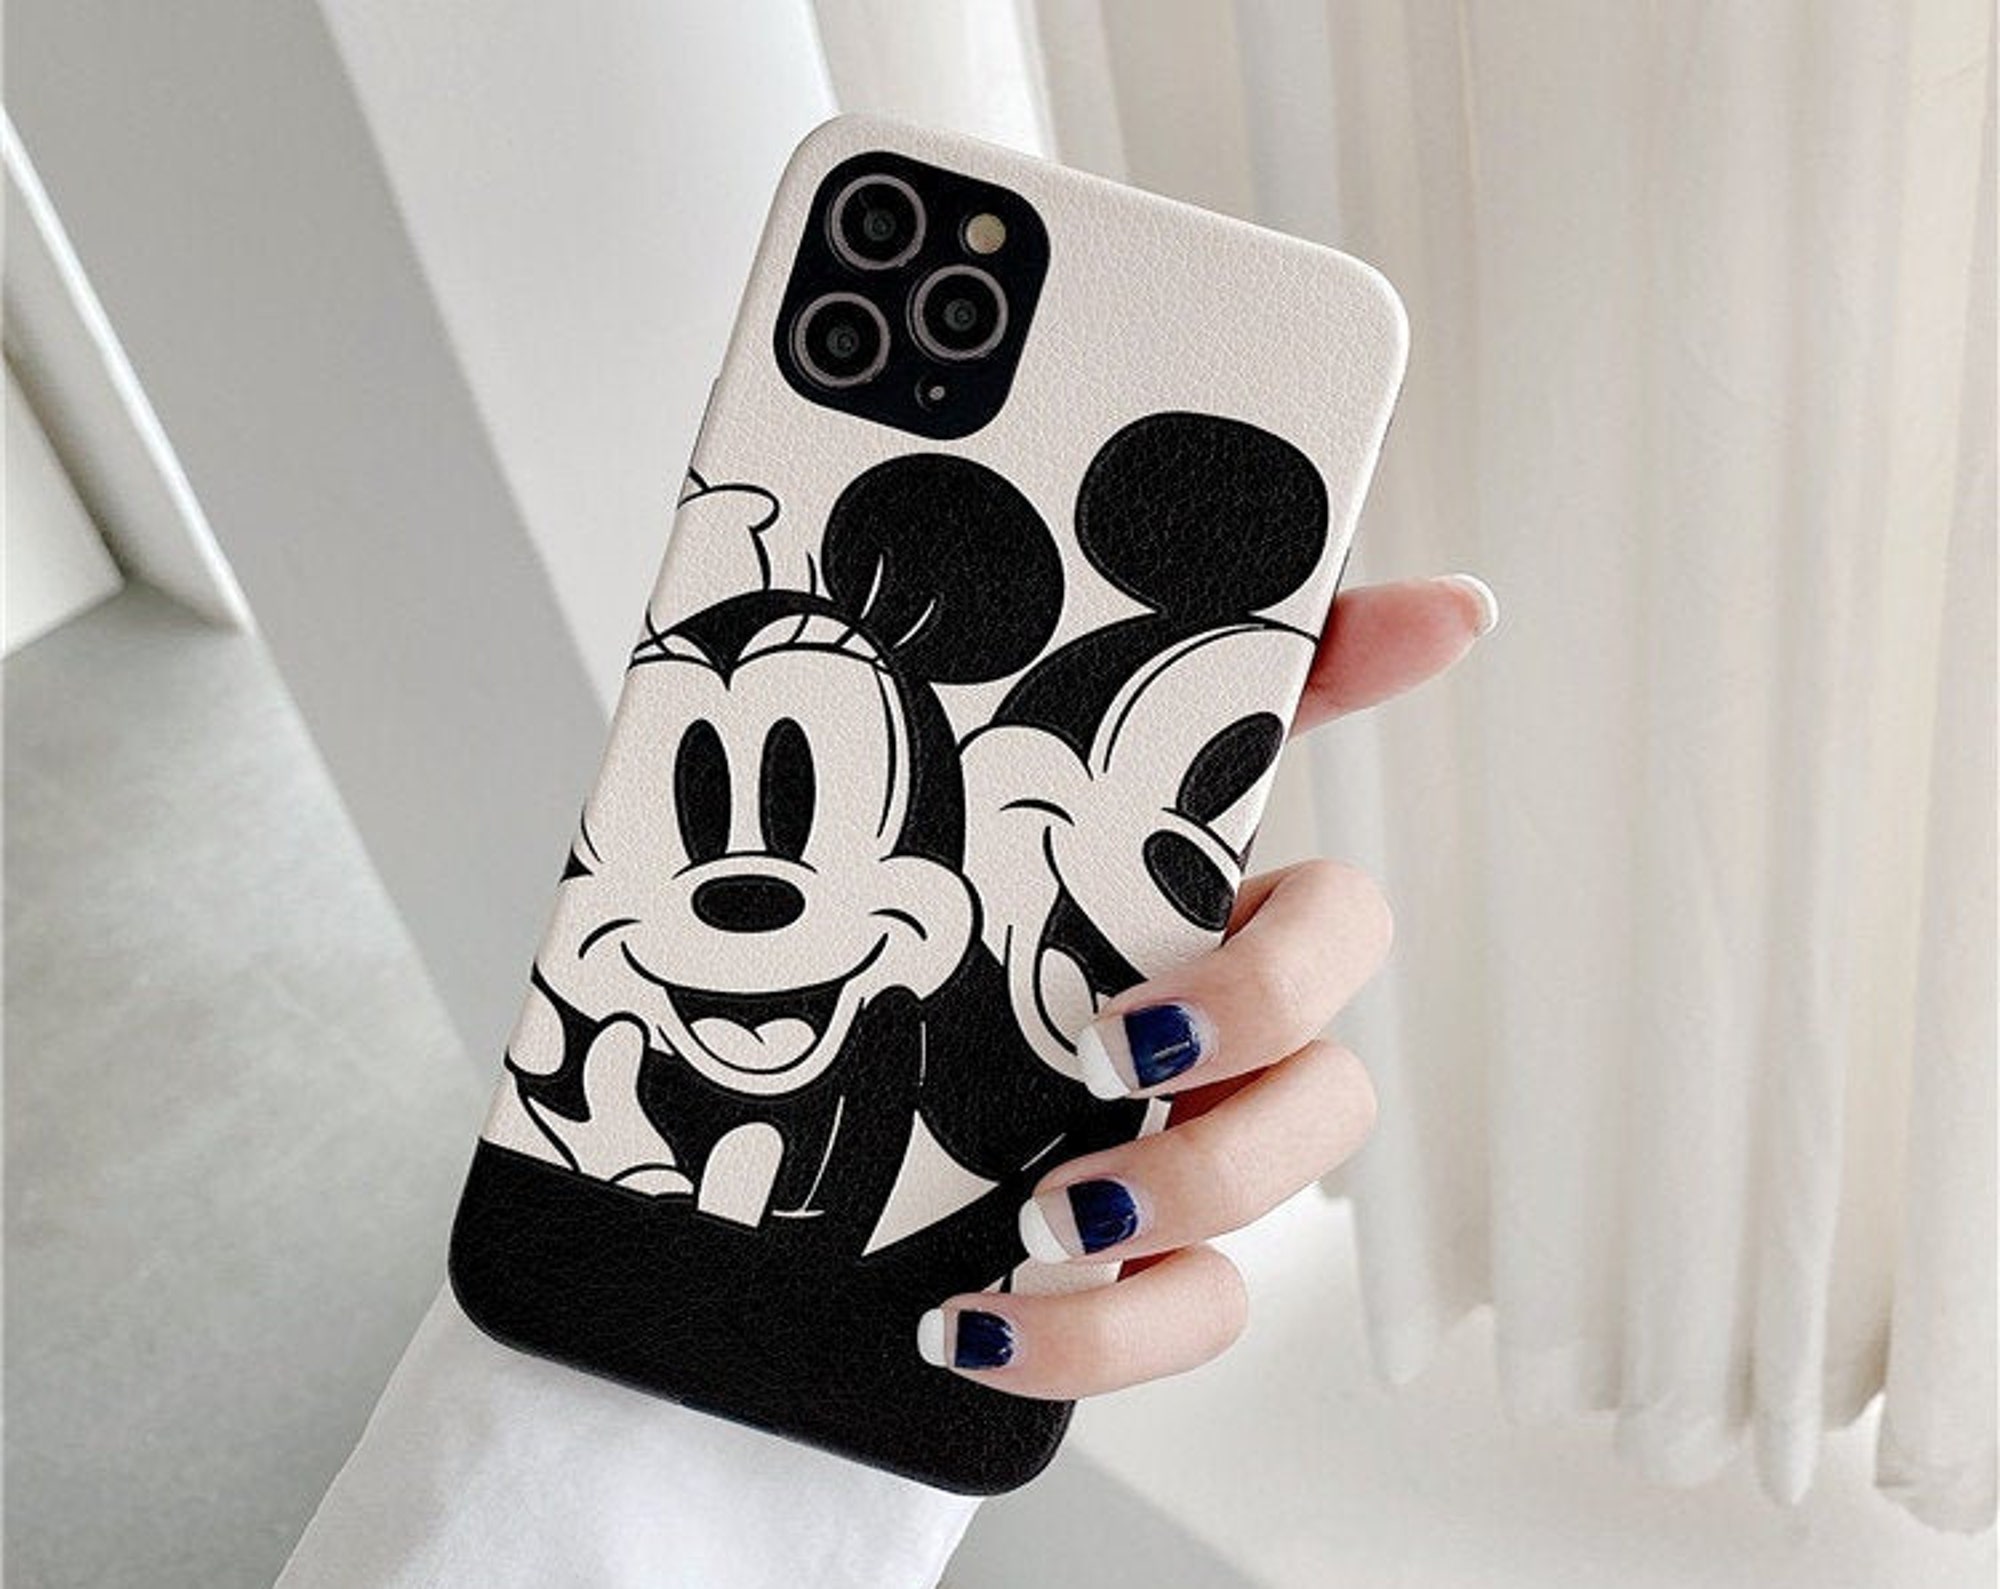 Discover Disney Classic Mickey Mouse 13 12 Case iPhone 13 12 Pro iPhone 13 12 Pro Max Case iPhone 13 pro